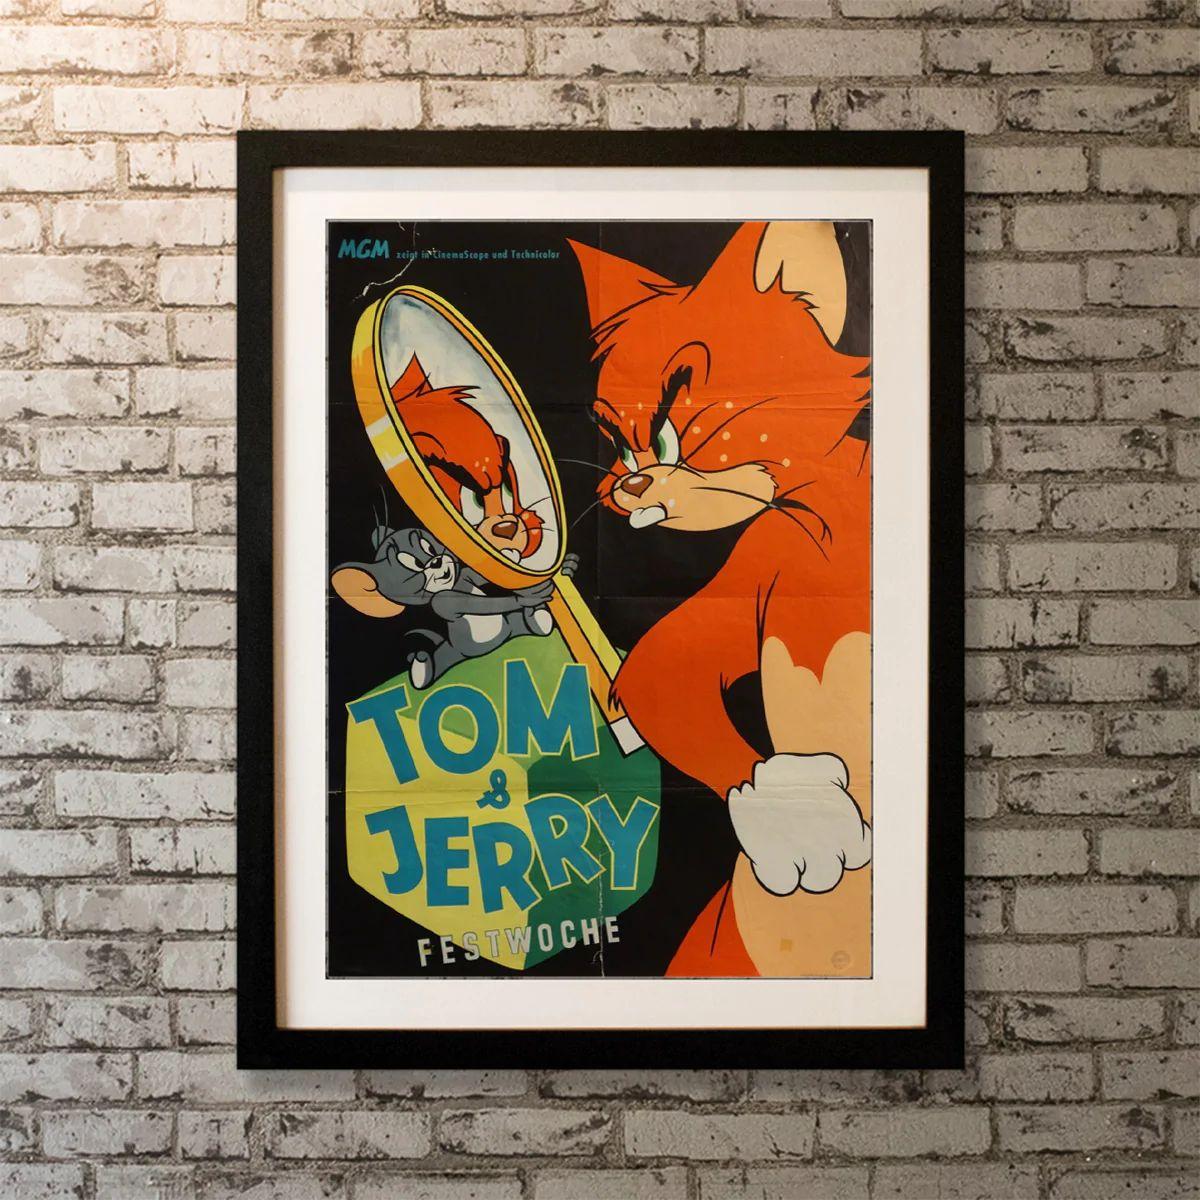 Tom and Jerry Festival Week, Unframed Poster, 1958

Original German Teaser Poster (23 X 33 Inches). Poster for a German Tom and Jerry festival. Peculiarly shows Tom and Jerry with their colors reversed. 

Year: 1958
Nationality: German
Condition: